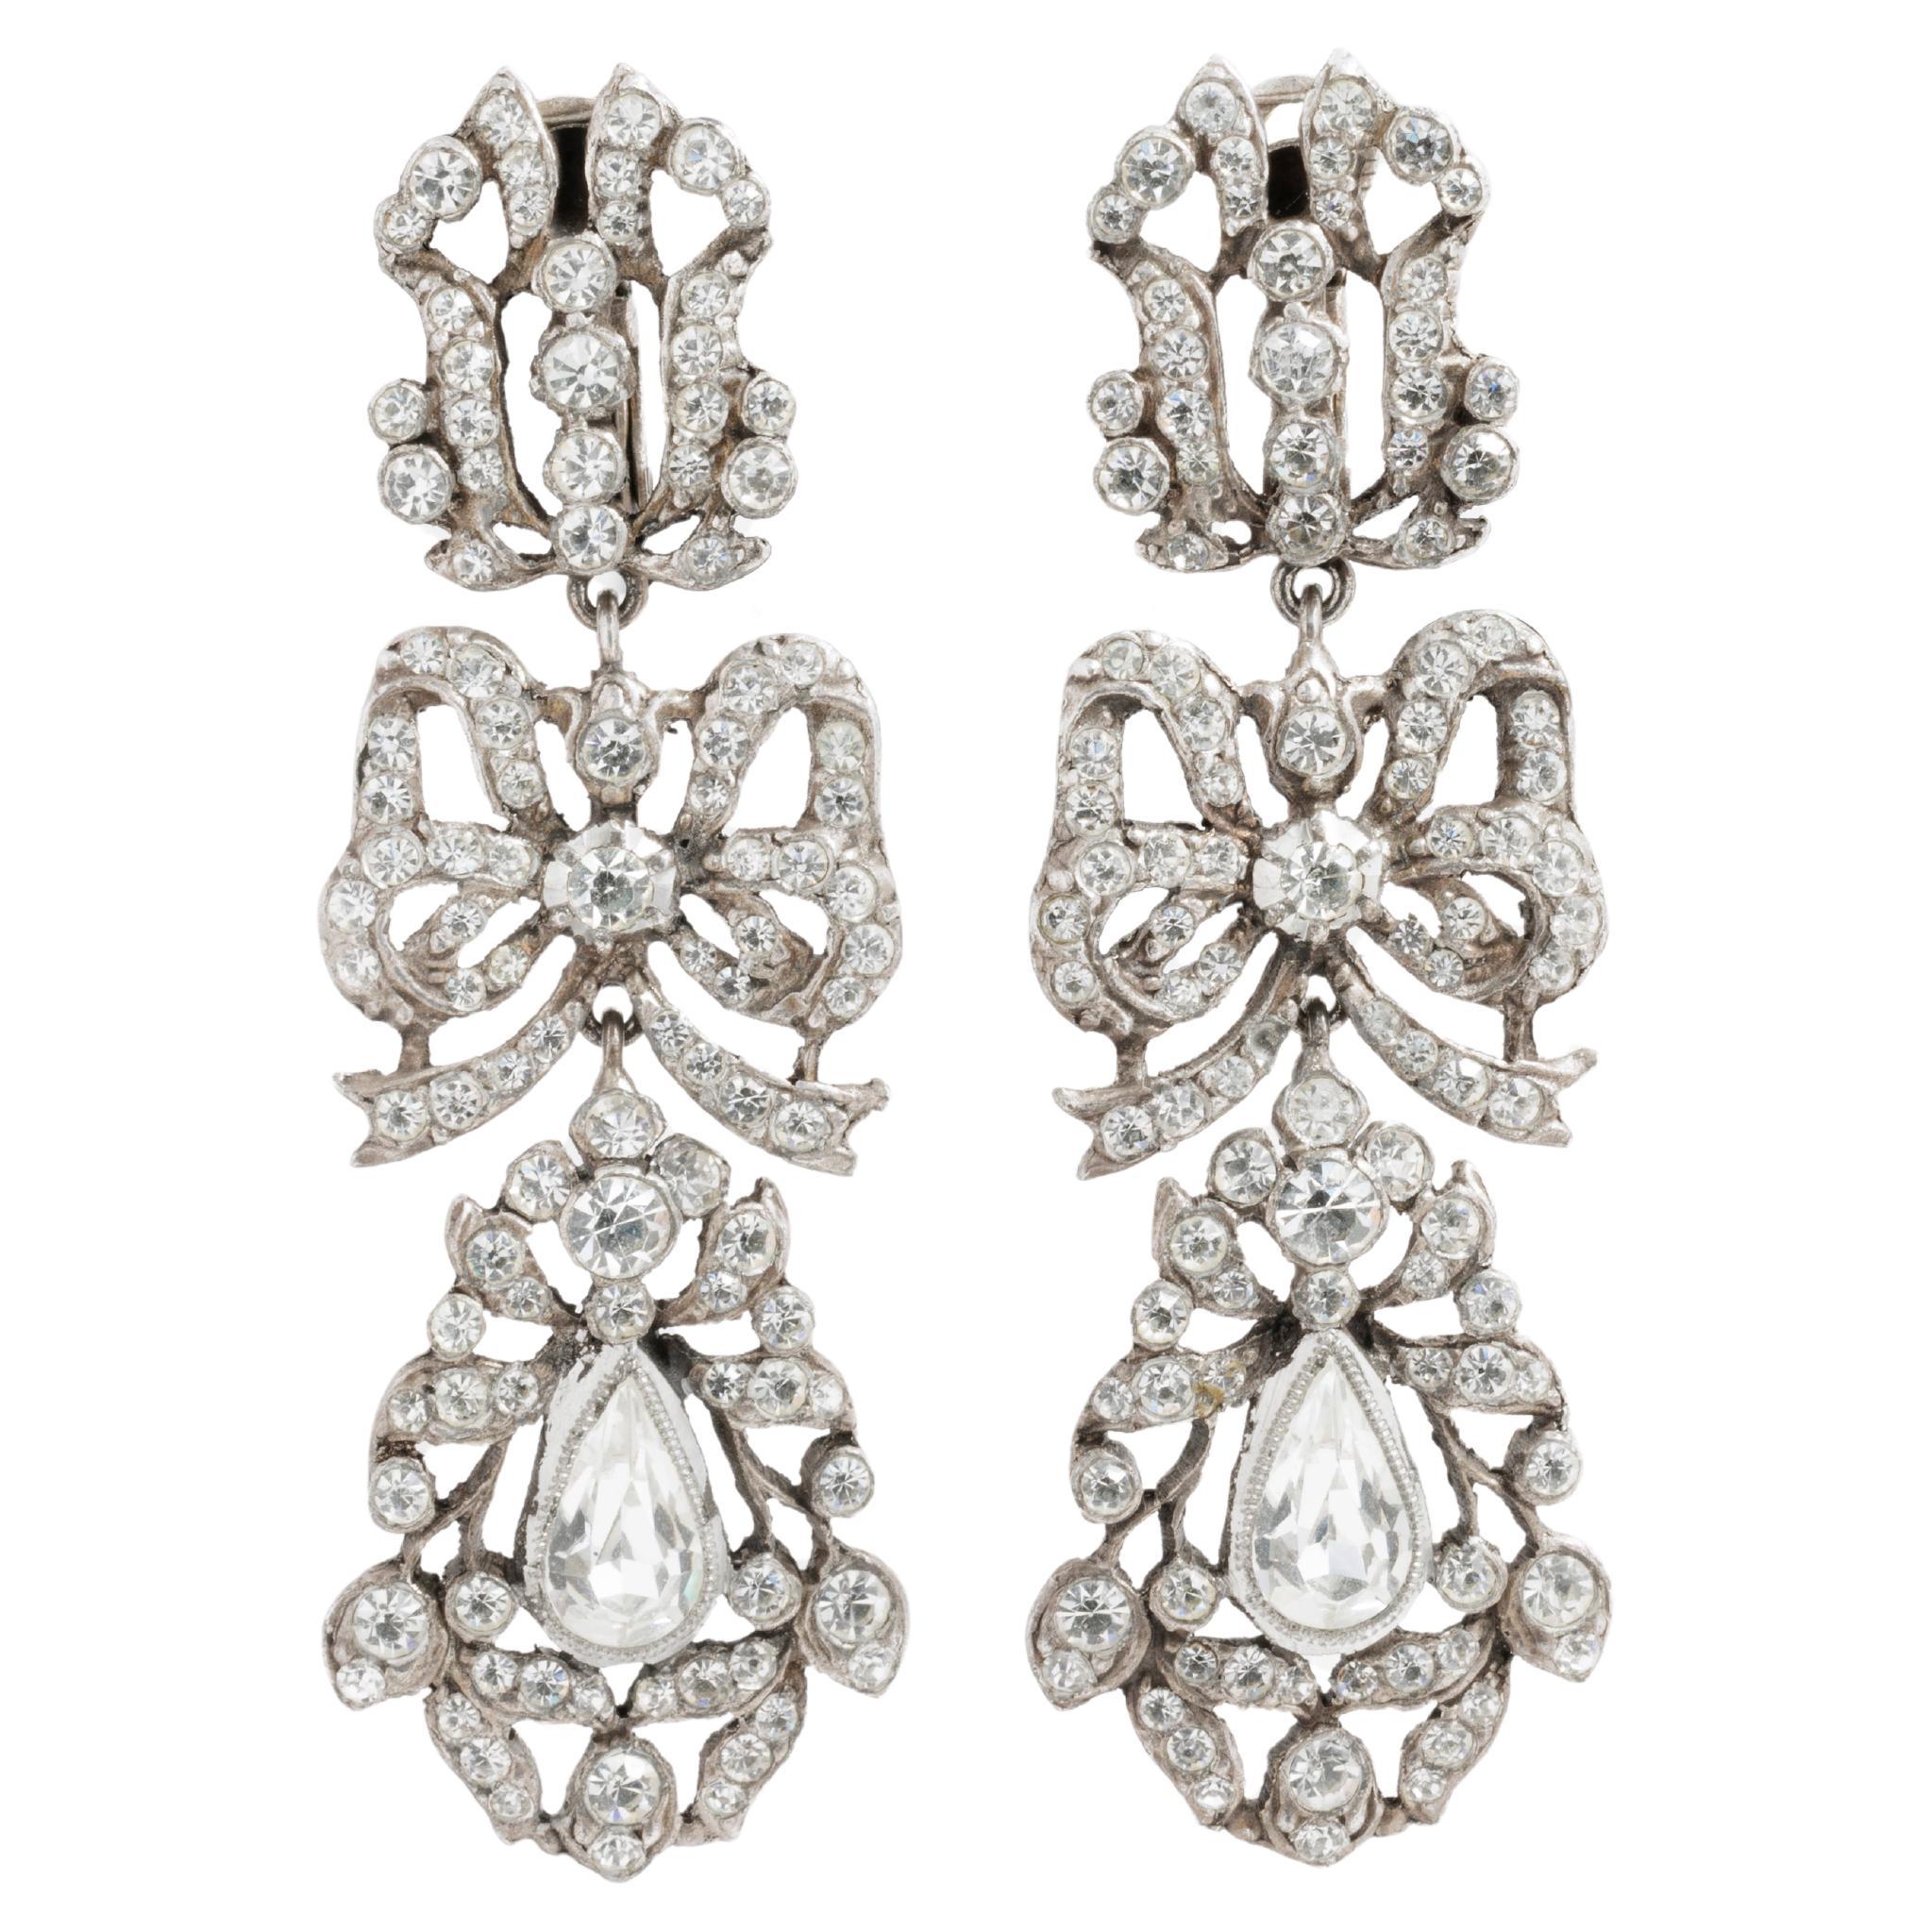 French 19th Century Silver and Clear Paste Pendeloque Chandelier Earrings For Sale